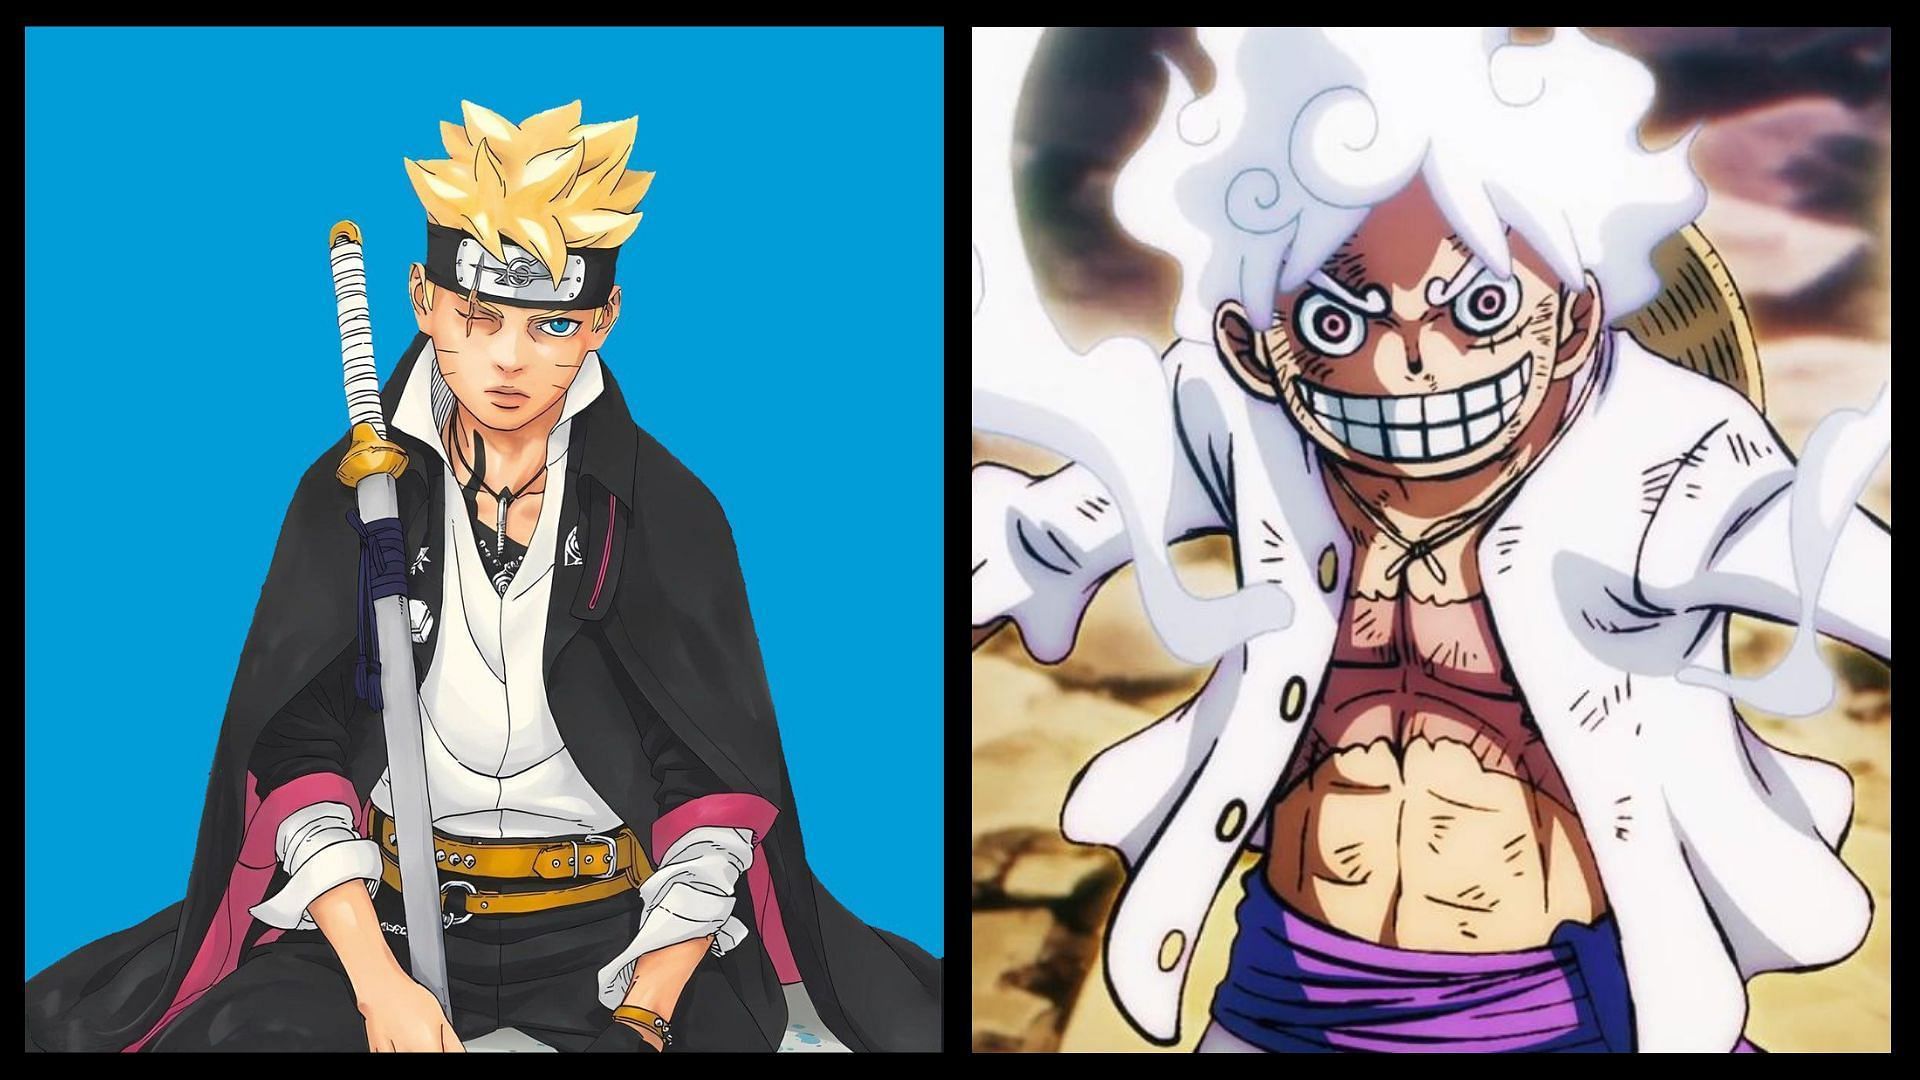 Boruto timeskip will leave Gear 5 hype miles behind, and it's obvious